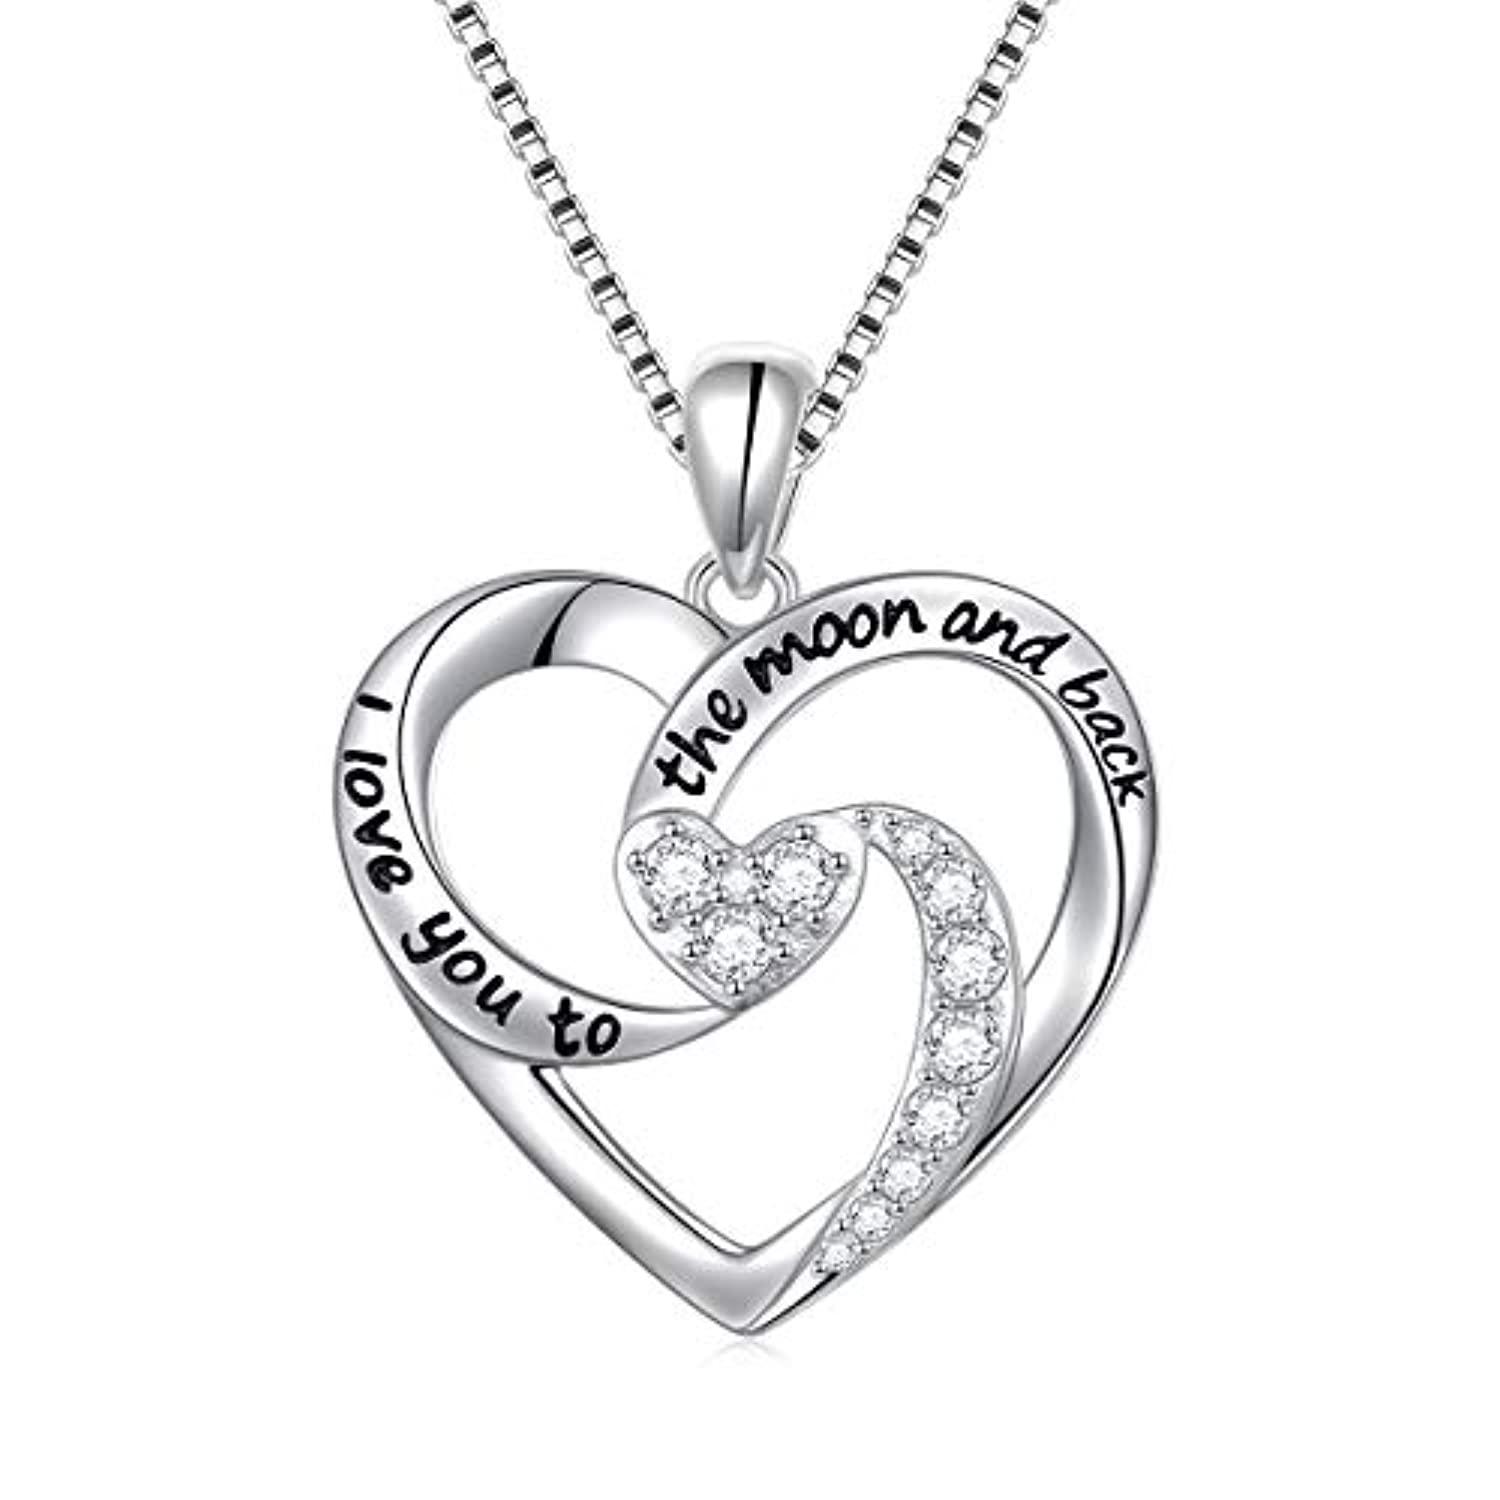 925 Sterling Silver Moon And Star Love Heart Pendant Necklace Gift for